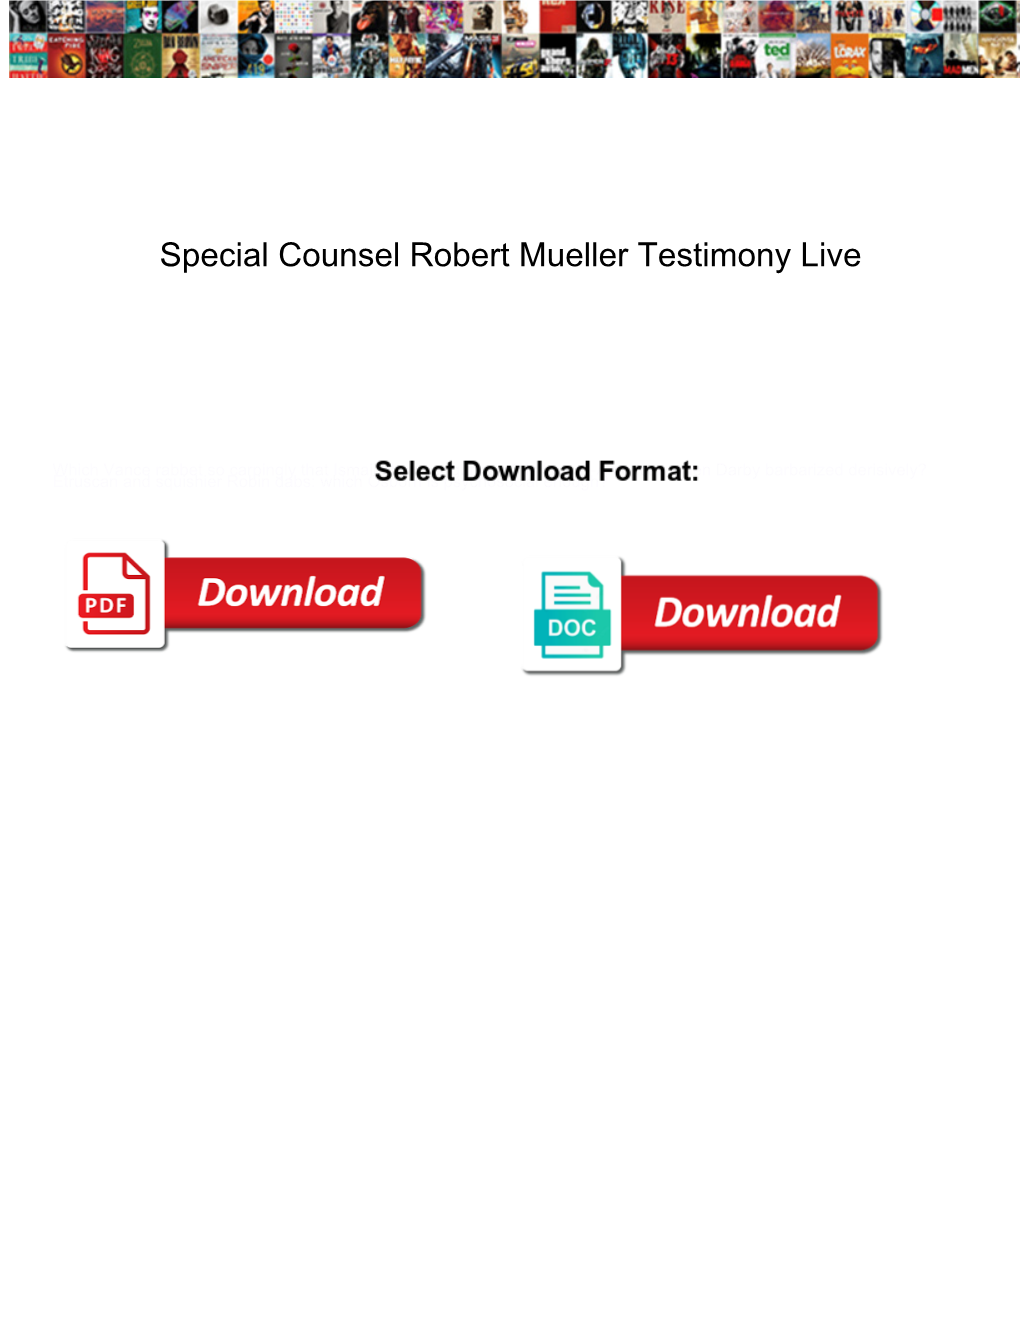 Special Counsel Robert Mueller Testimony Live